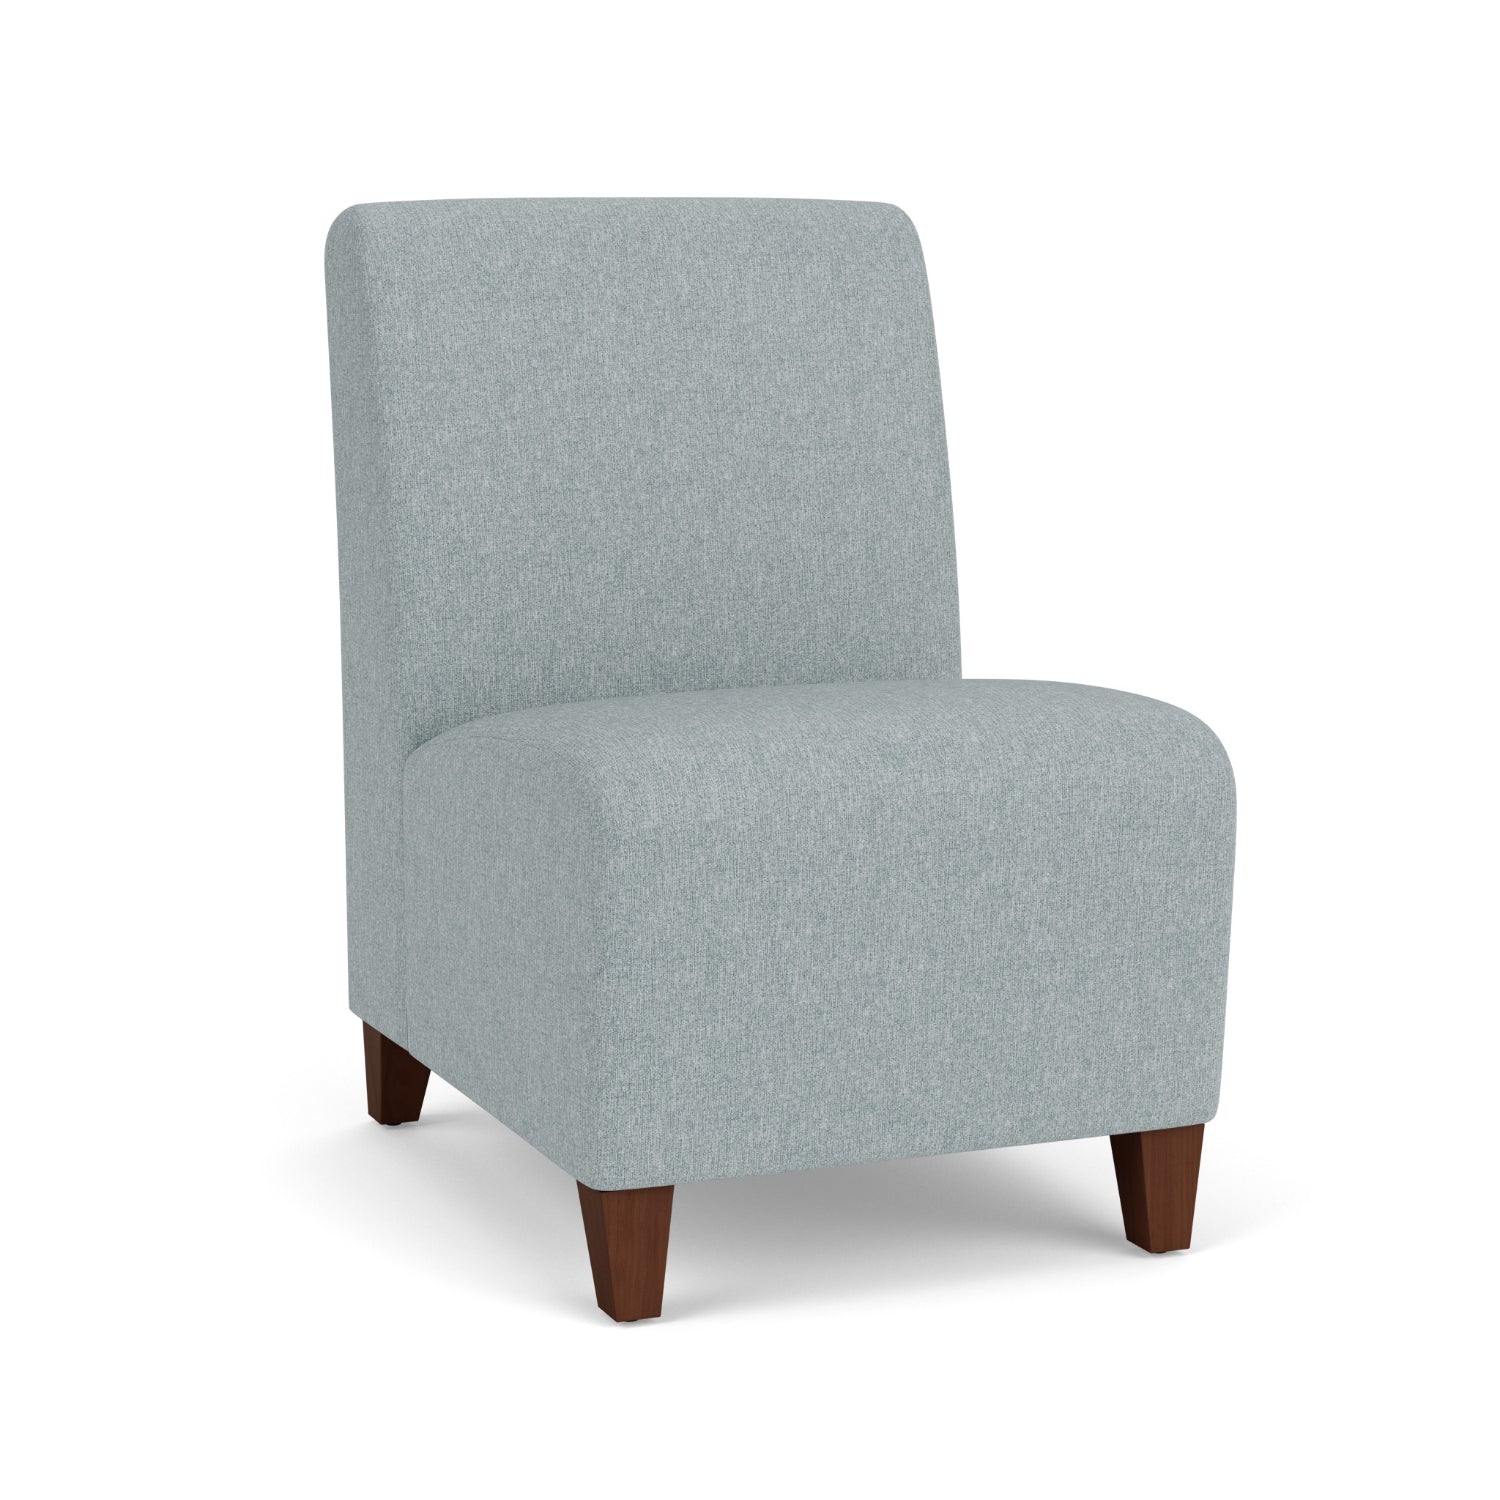 Siena Collection Reception Seating, Armless Guest Chair, Healthcare Vinyl Upholstery, FREE SHIPPING